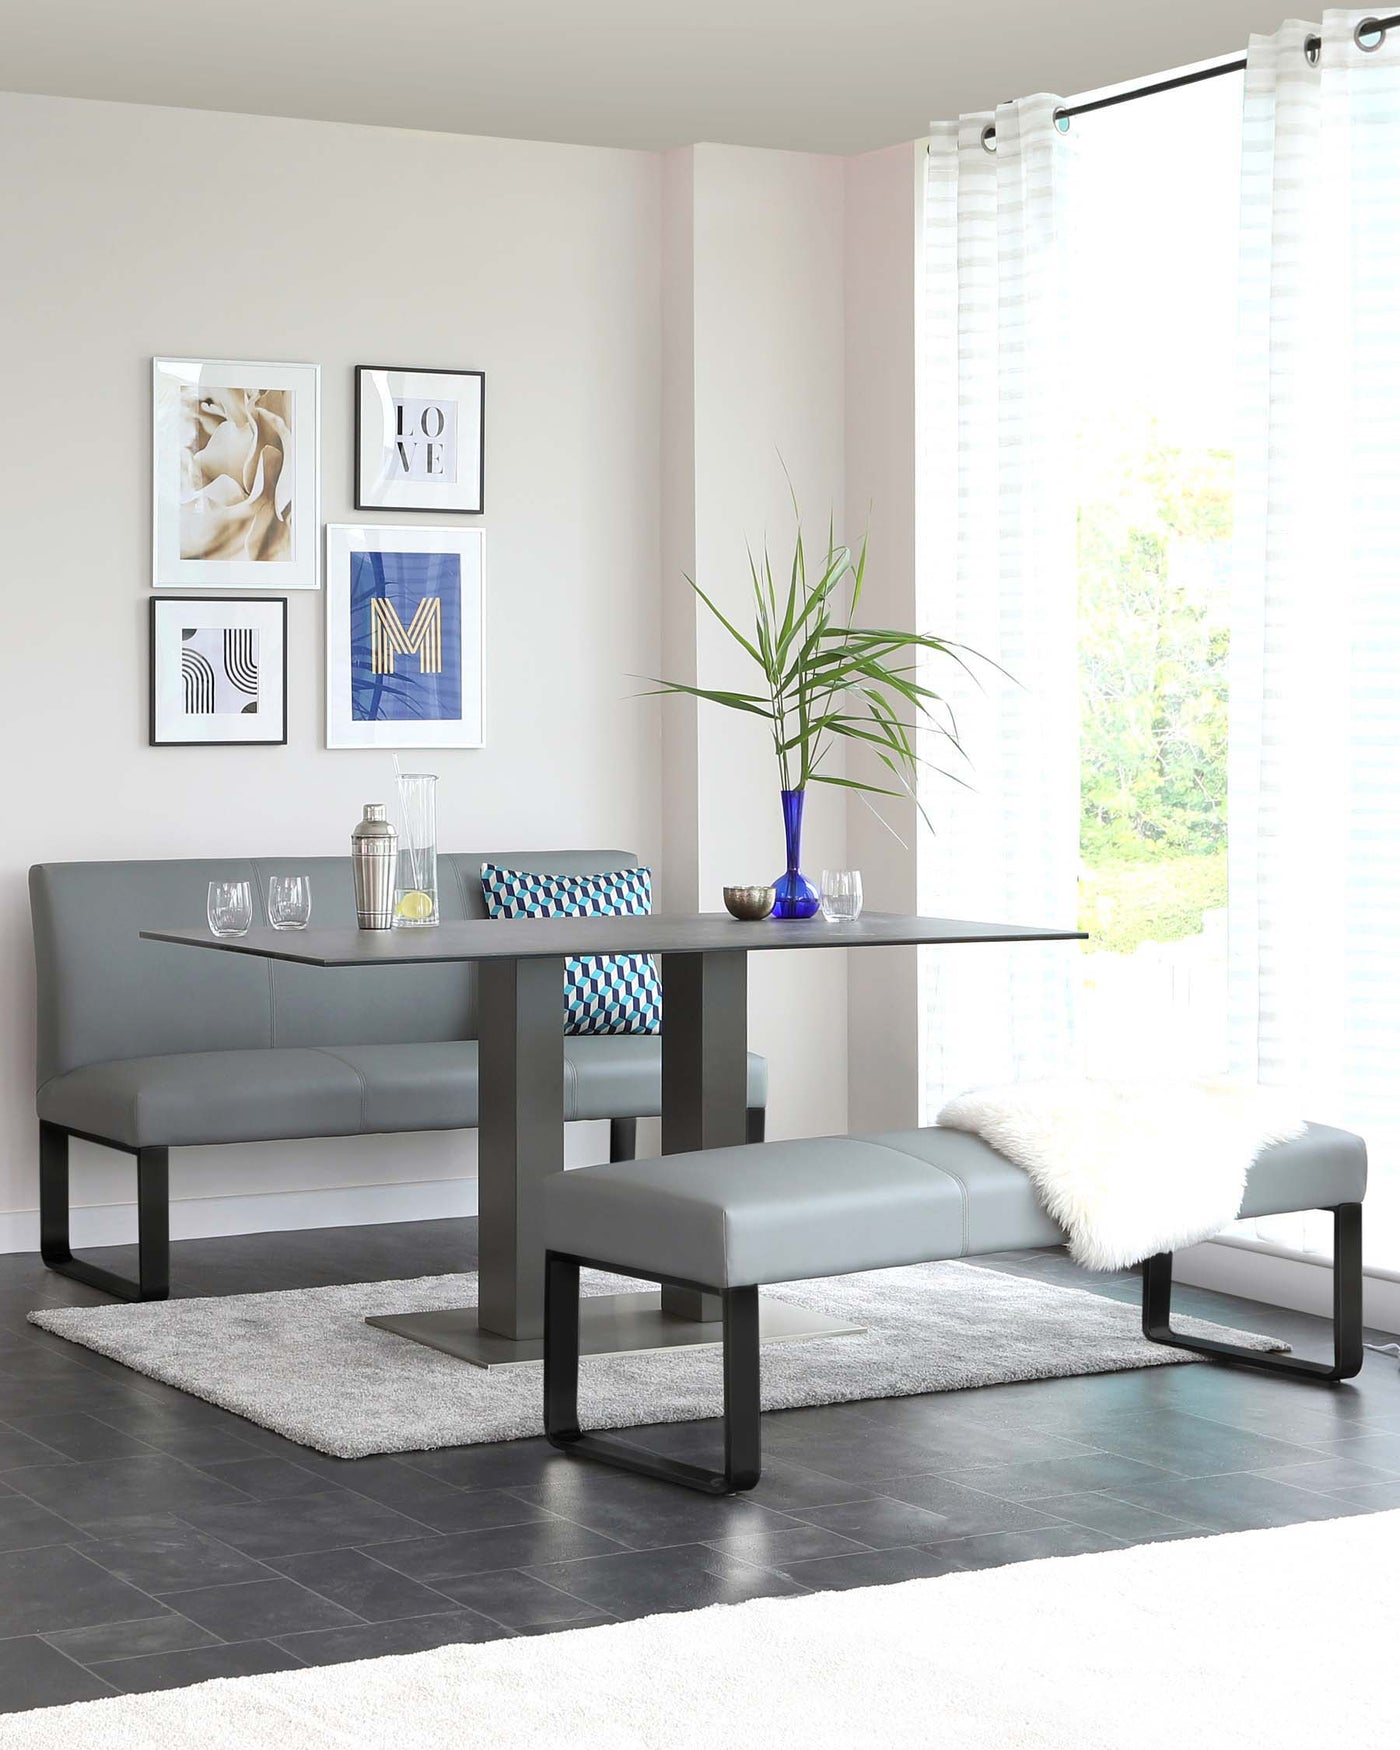 A modern dining set featuring a grey rectangular table with black metal legs, paired with a matching dining bench and two stools. The table is accessorized with decorative items including glasses, a blue vase, and a small plant. A plush grey area rug lies beneath the set.